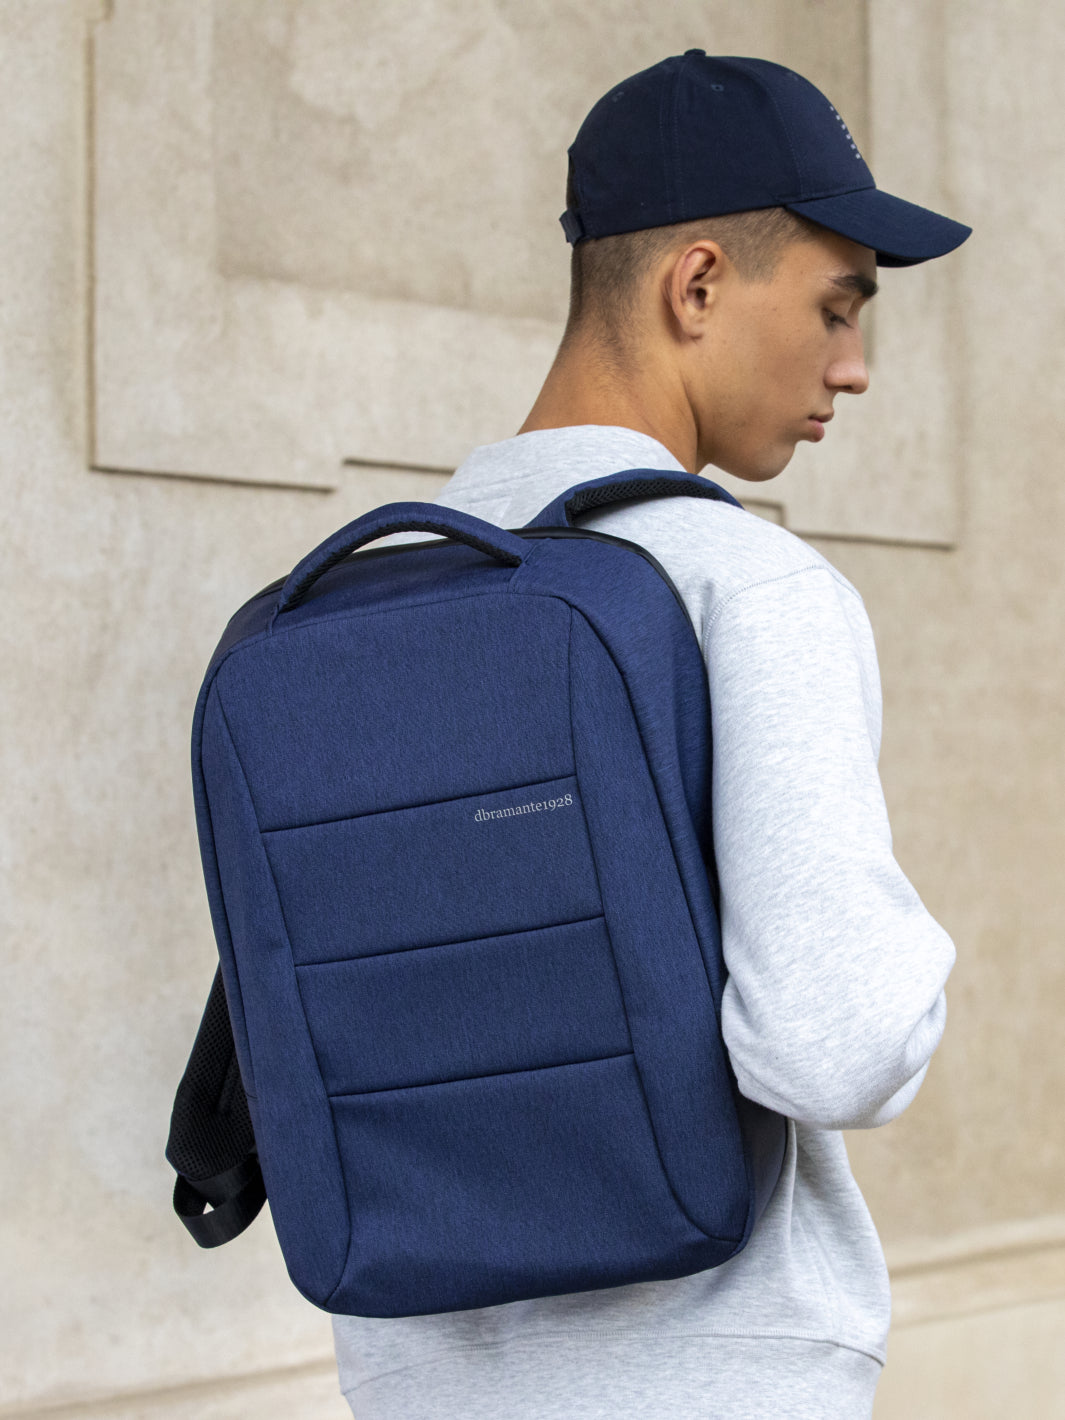 Christiansborg: Spacious & Eco-Friendly Backpack from Recycled Plastic –  dbramante1928